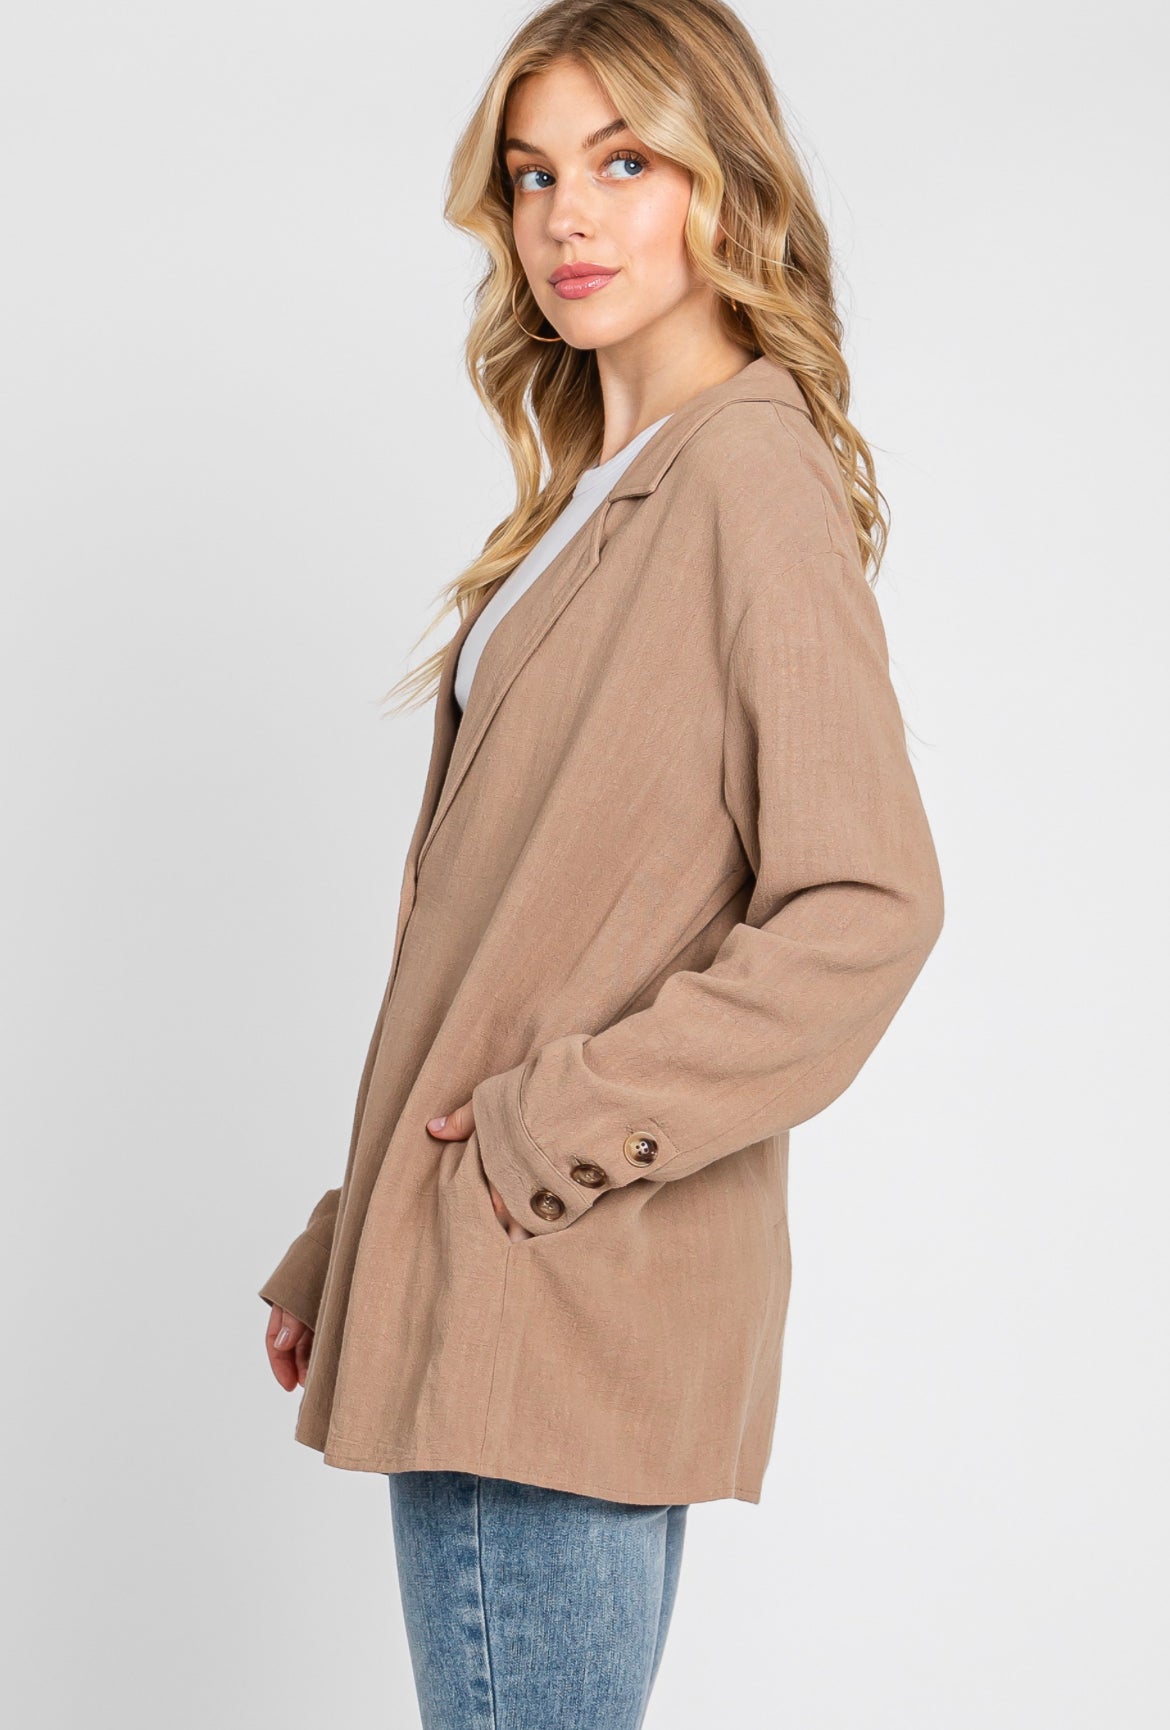 Tofee relaxed blazer